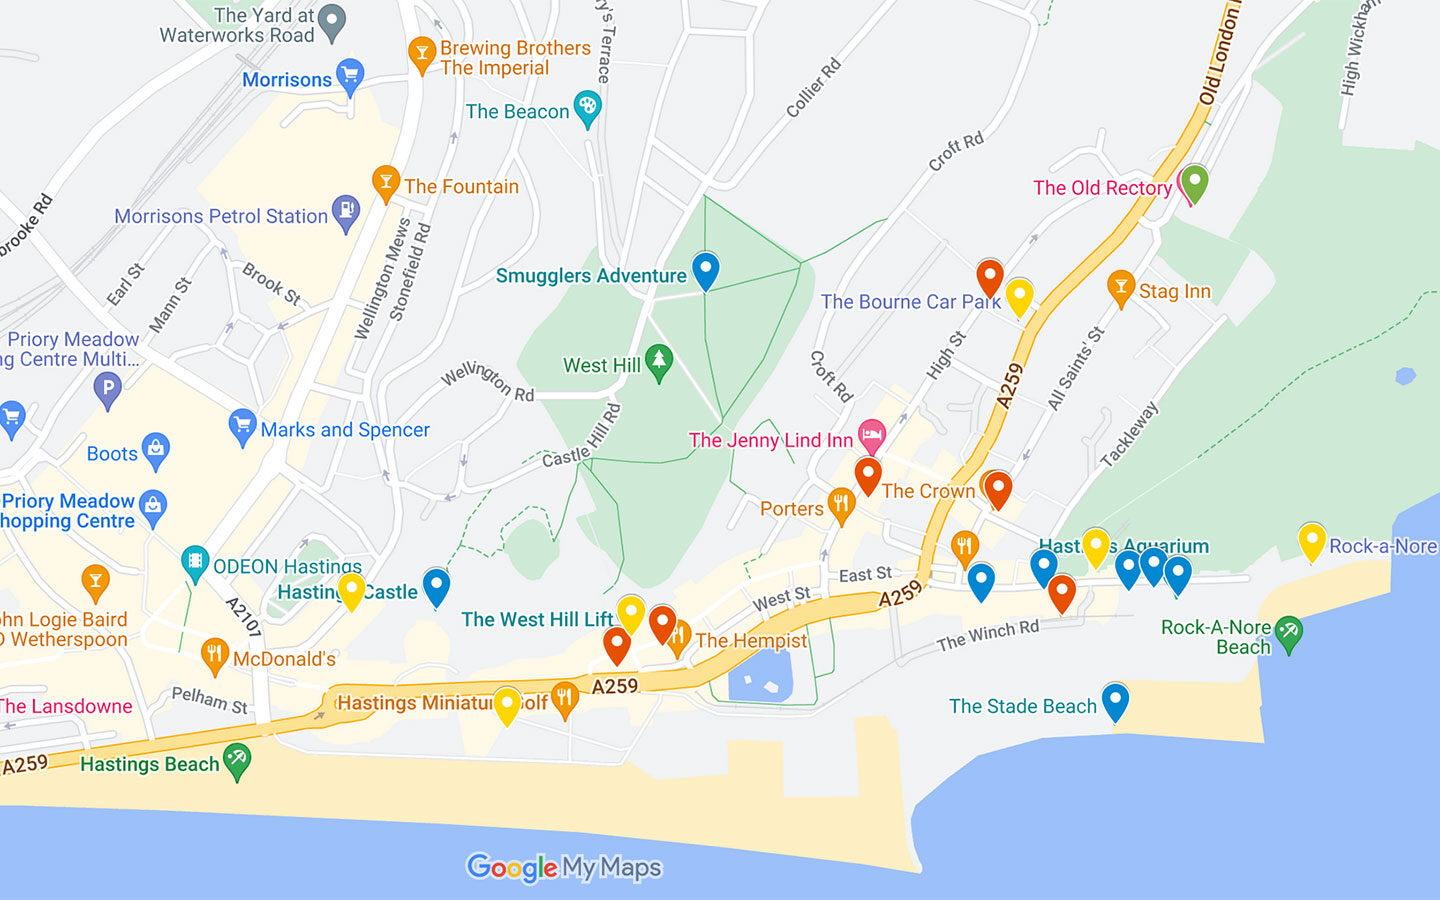 Map of things to do in Hastings, East Sussex